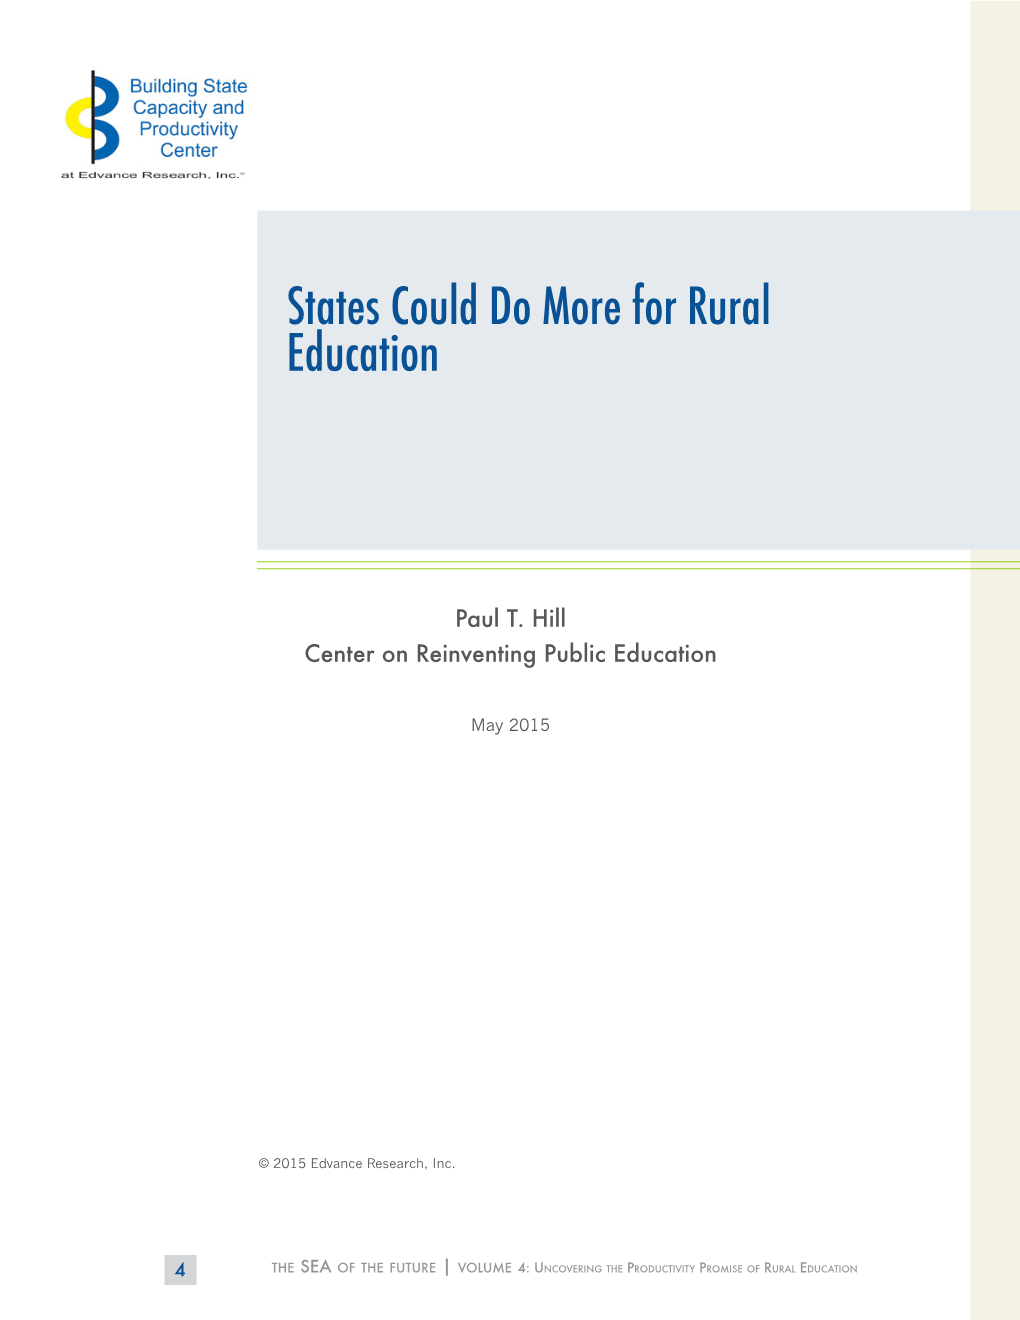 States Could Do More for Rural Education